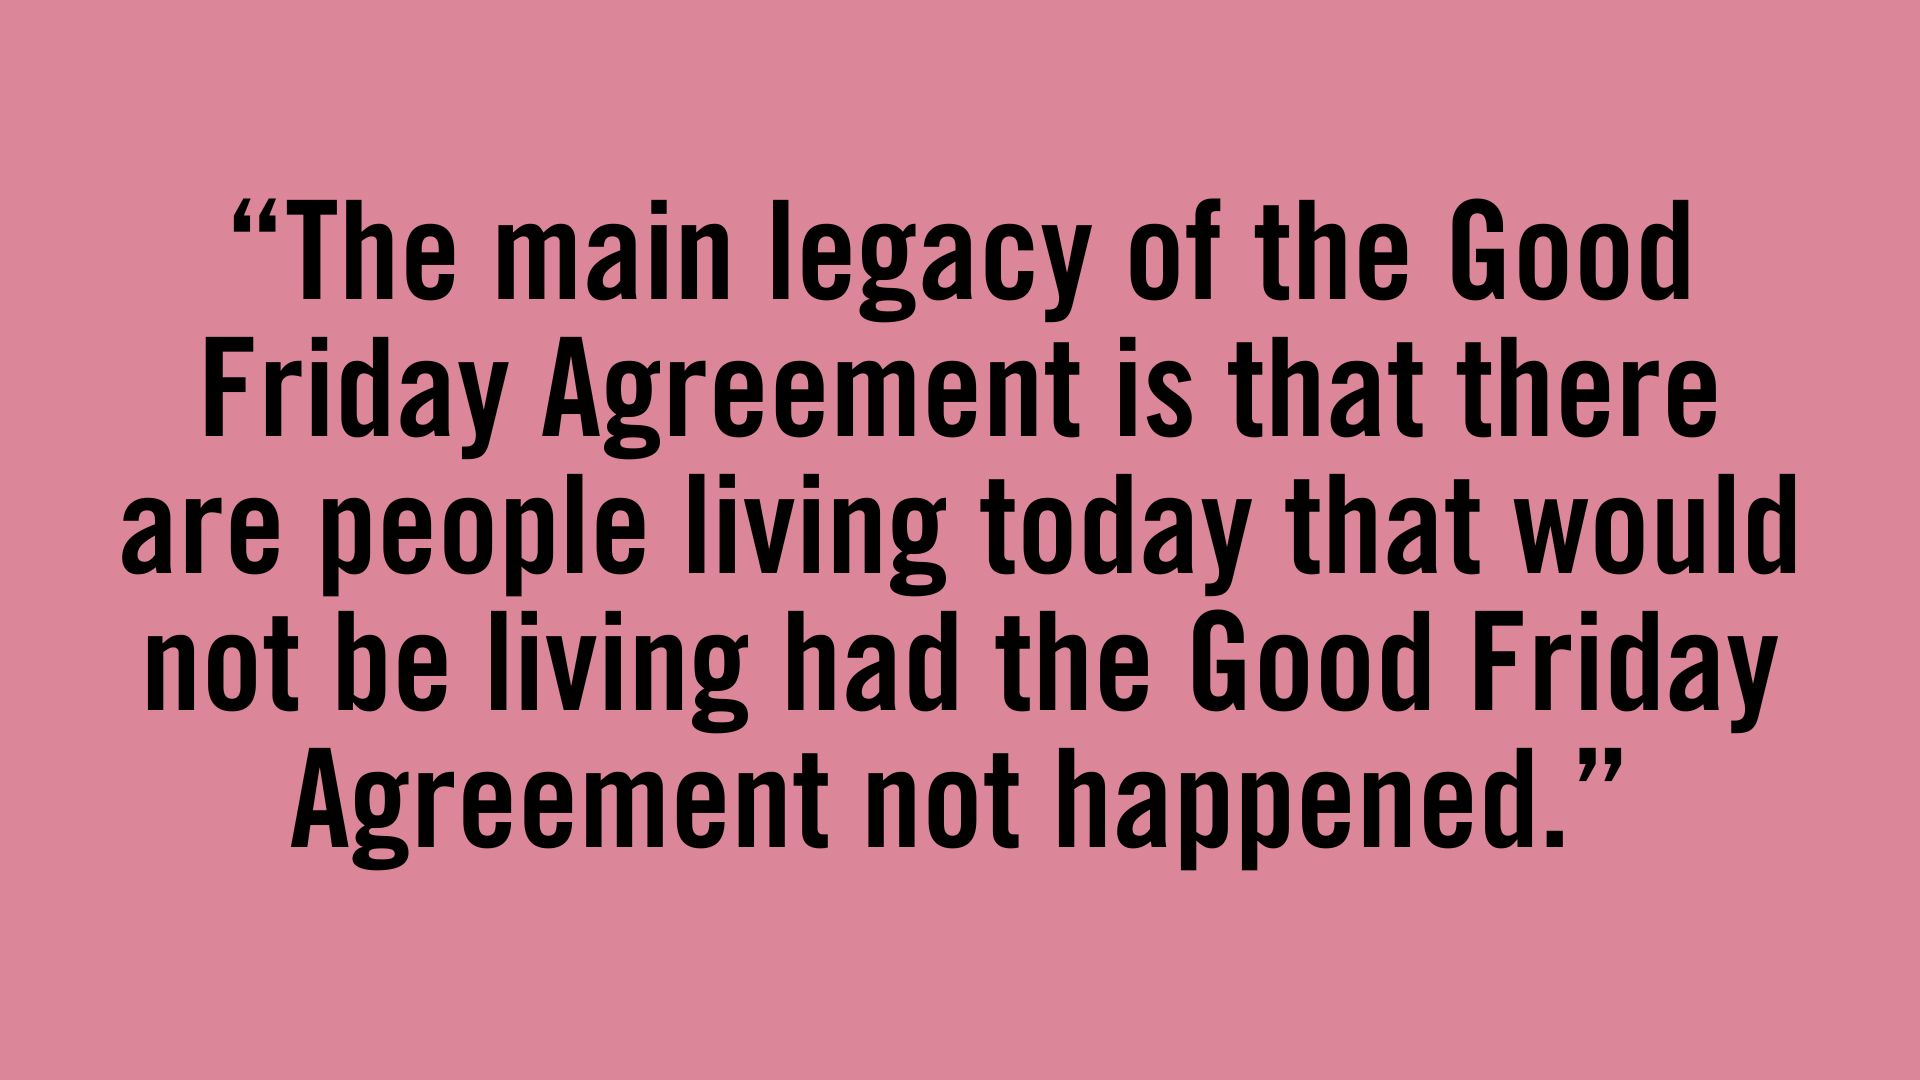 The main legacy of the Good Friday Agreement is that there are people living today that would not be living had the Good Friday Agreement not happened.